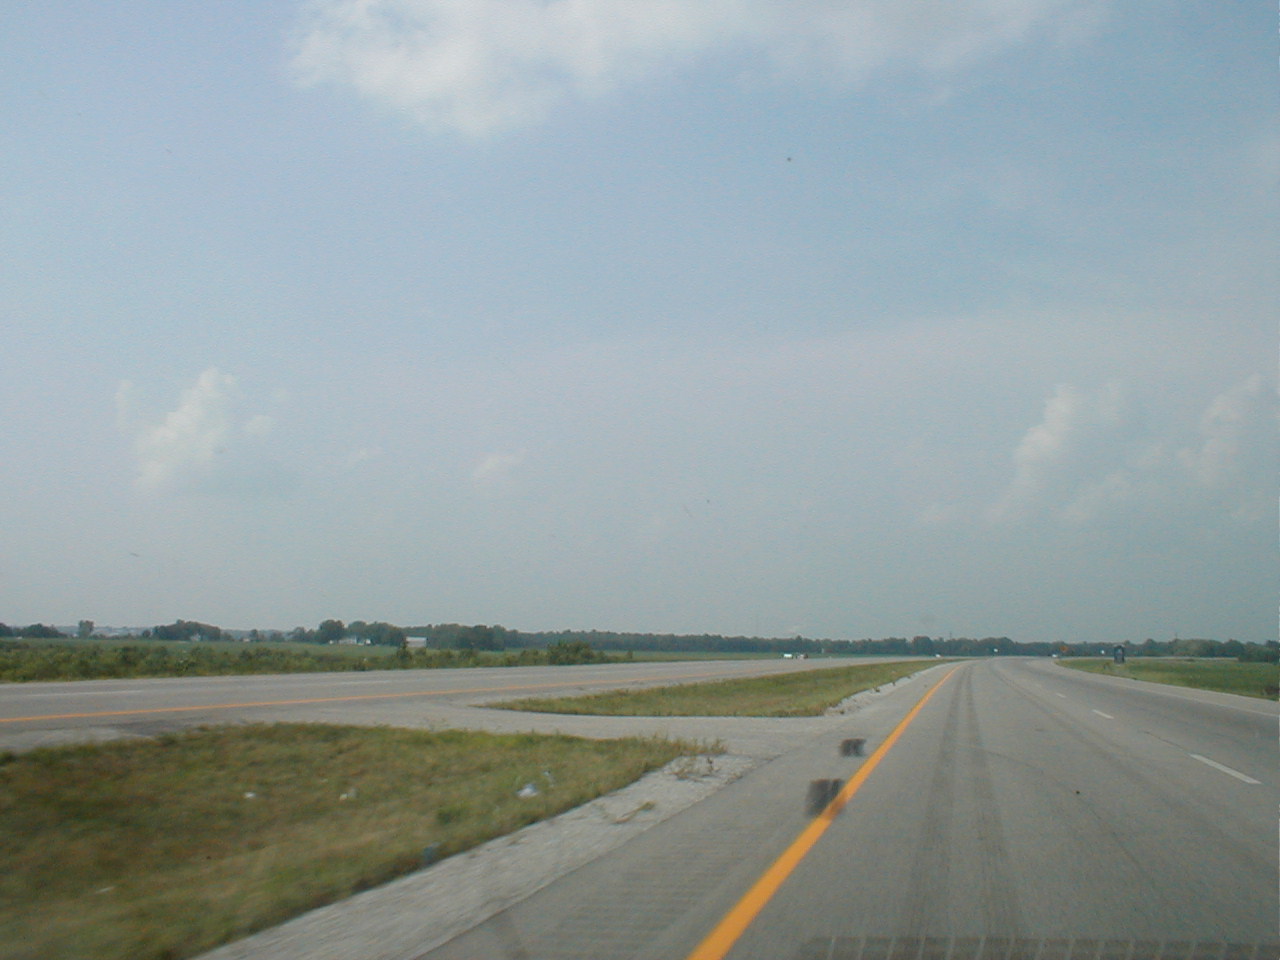 A newly four-laned section of US 60 east of Owensboro. The smoke stack and cooling towers of the Rockport power plant and the towers of the Natcher bridge are faintly visible.